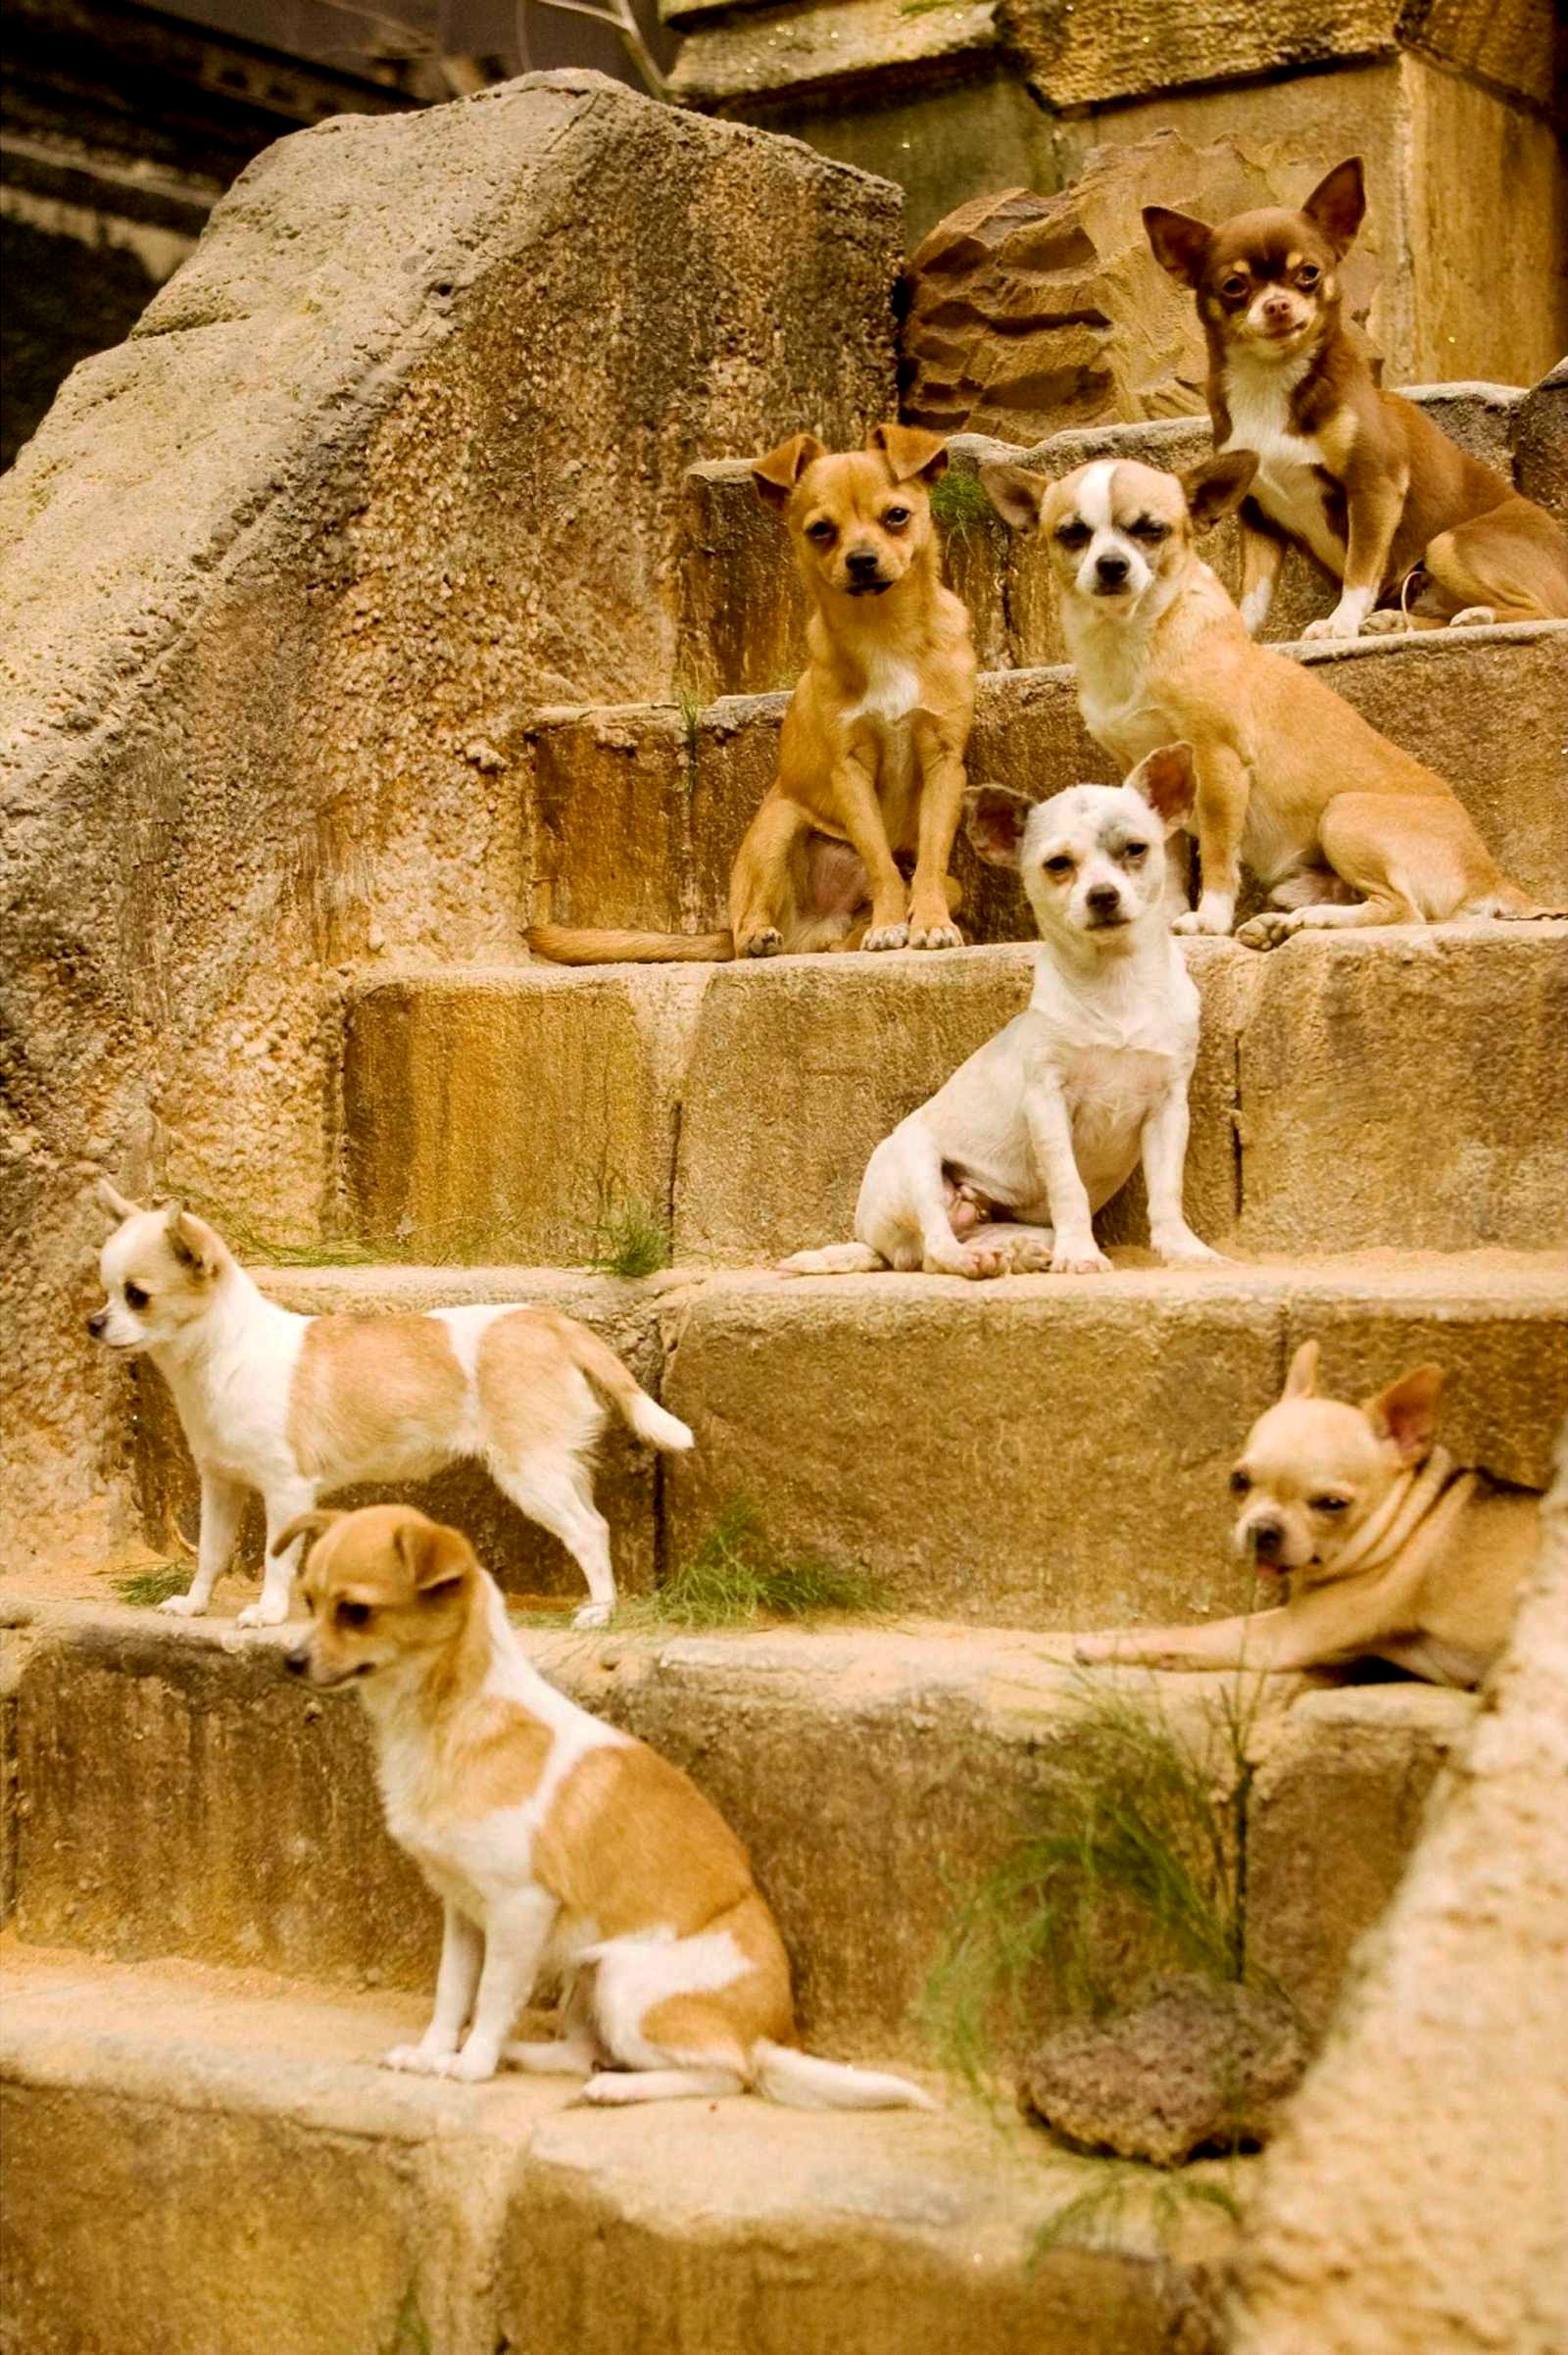 A scene from Walt Disney Pictures' Beverly Hills Chihuahua (2008). Photo credit by Daniel Daza.